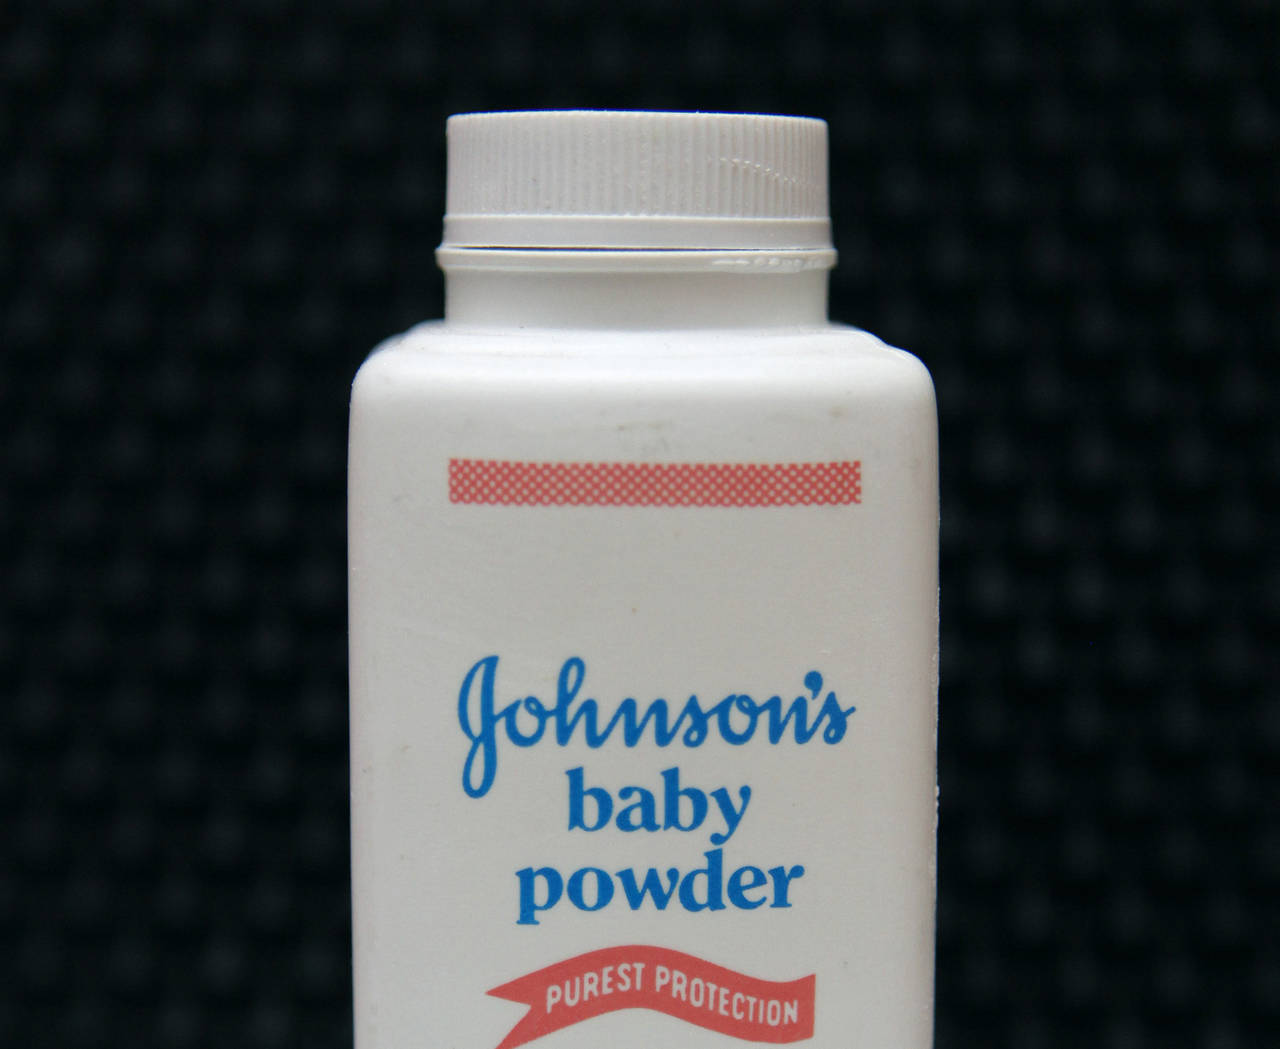 FILE - In this April 15, 2011 file photo, a bottle of Johnson's baby powder is displayed in San Fra...